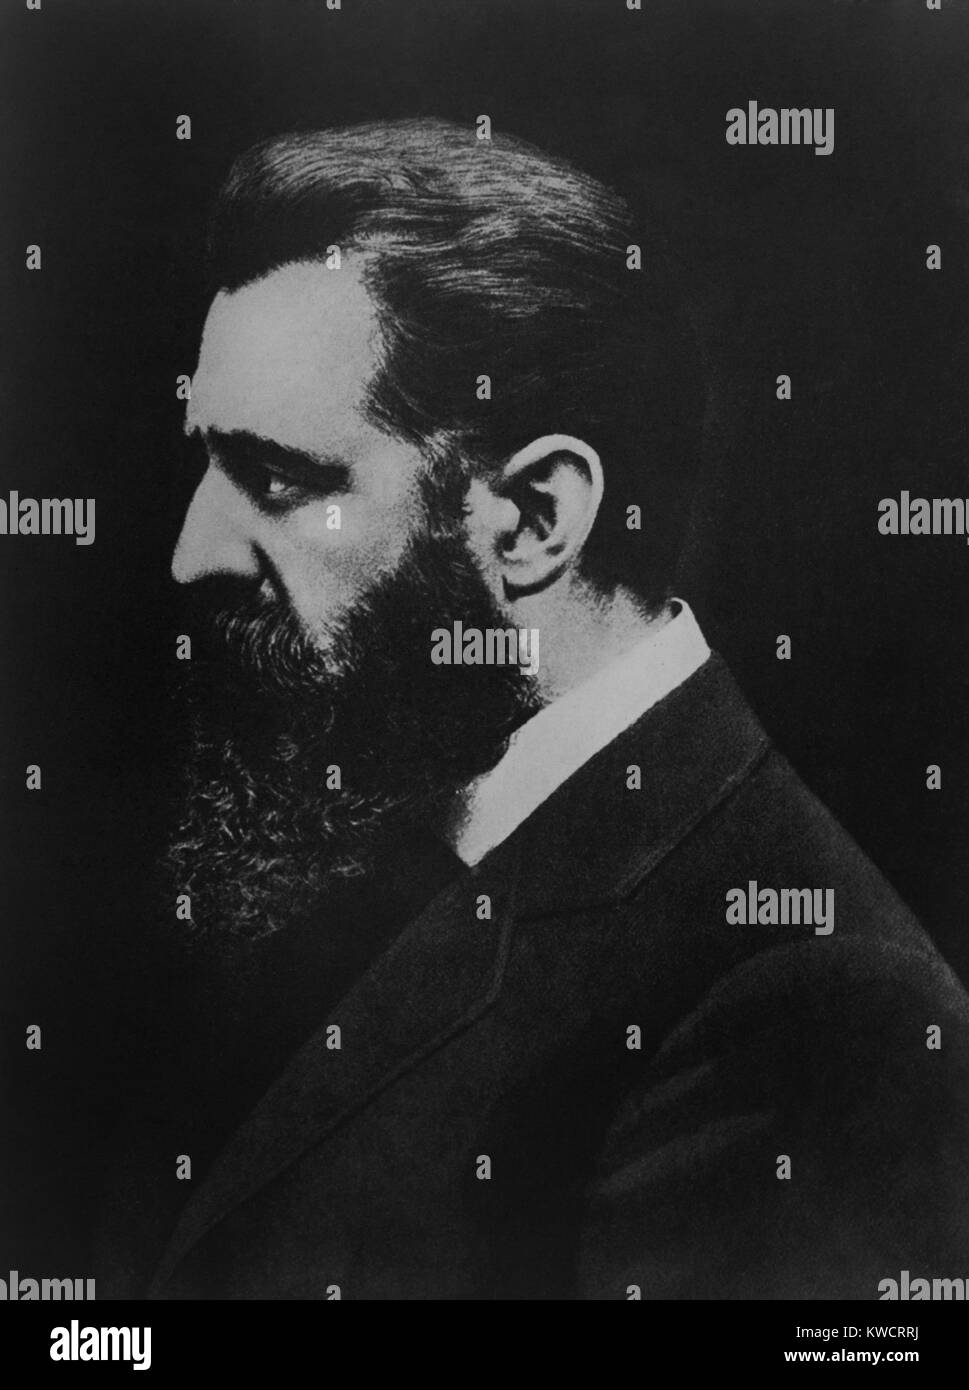 Theodore Herzl founded the World Zionist Organization in 1897. He promoted Jewish migration to Palestine to establish a Jewish nation. - (BSLOC 2015 1 42) Stock Photo